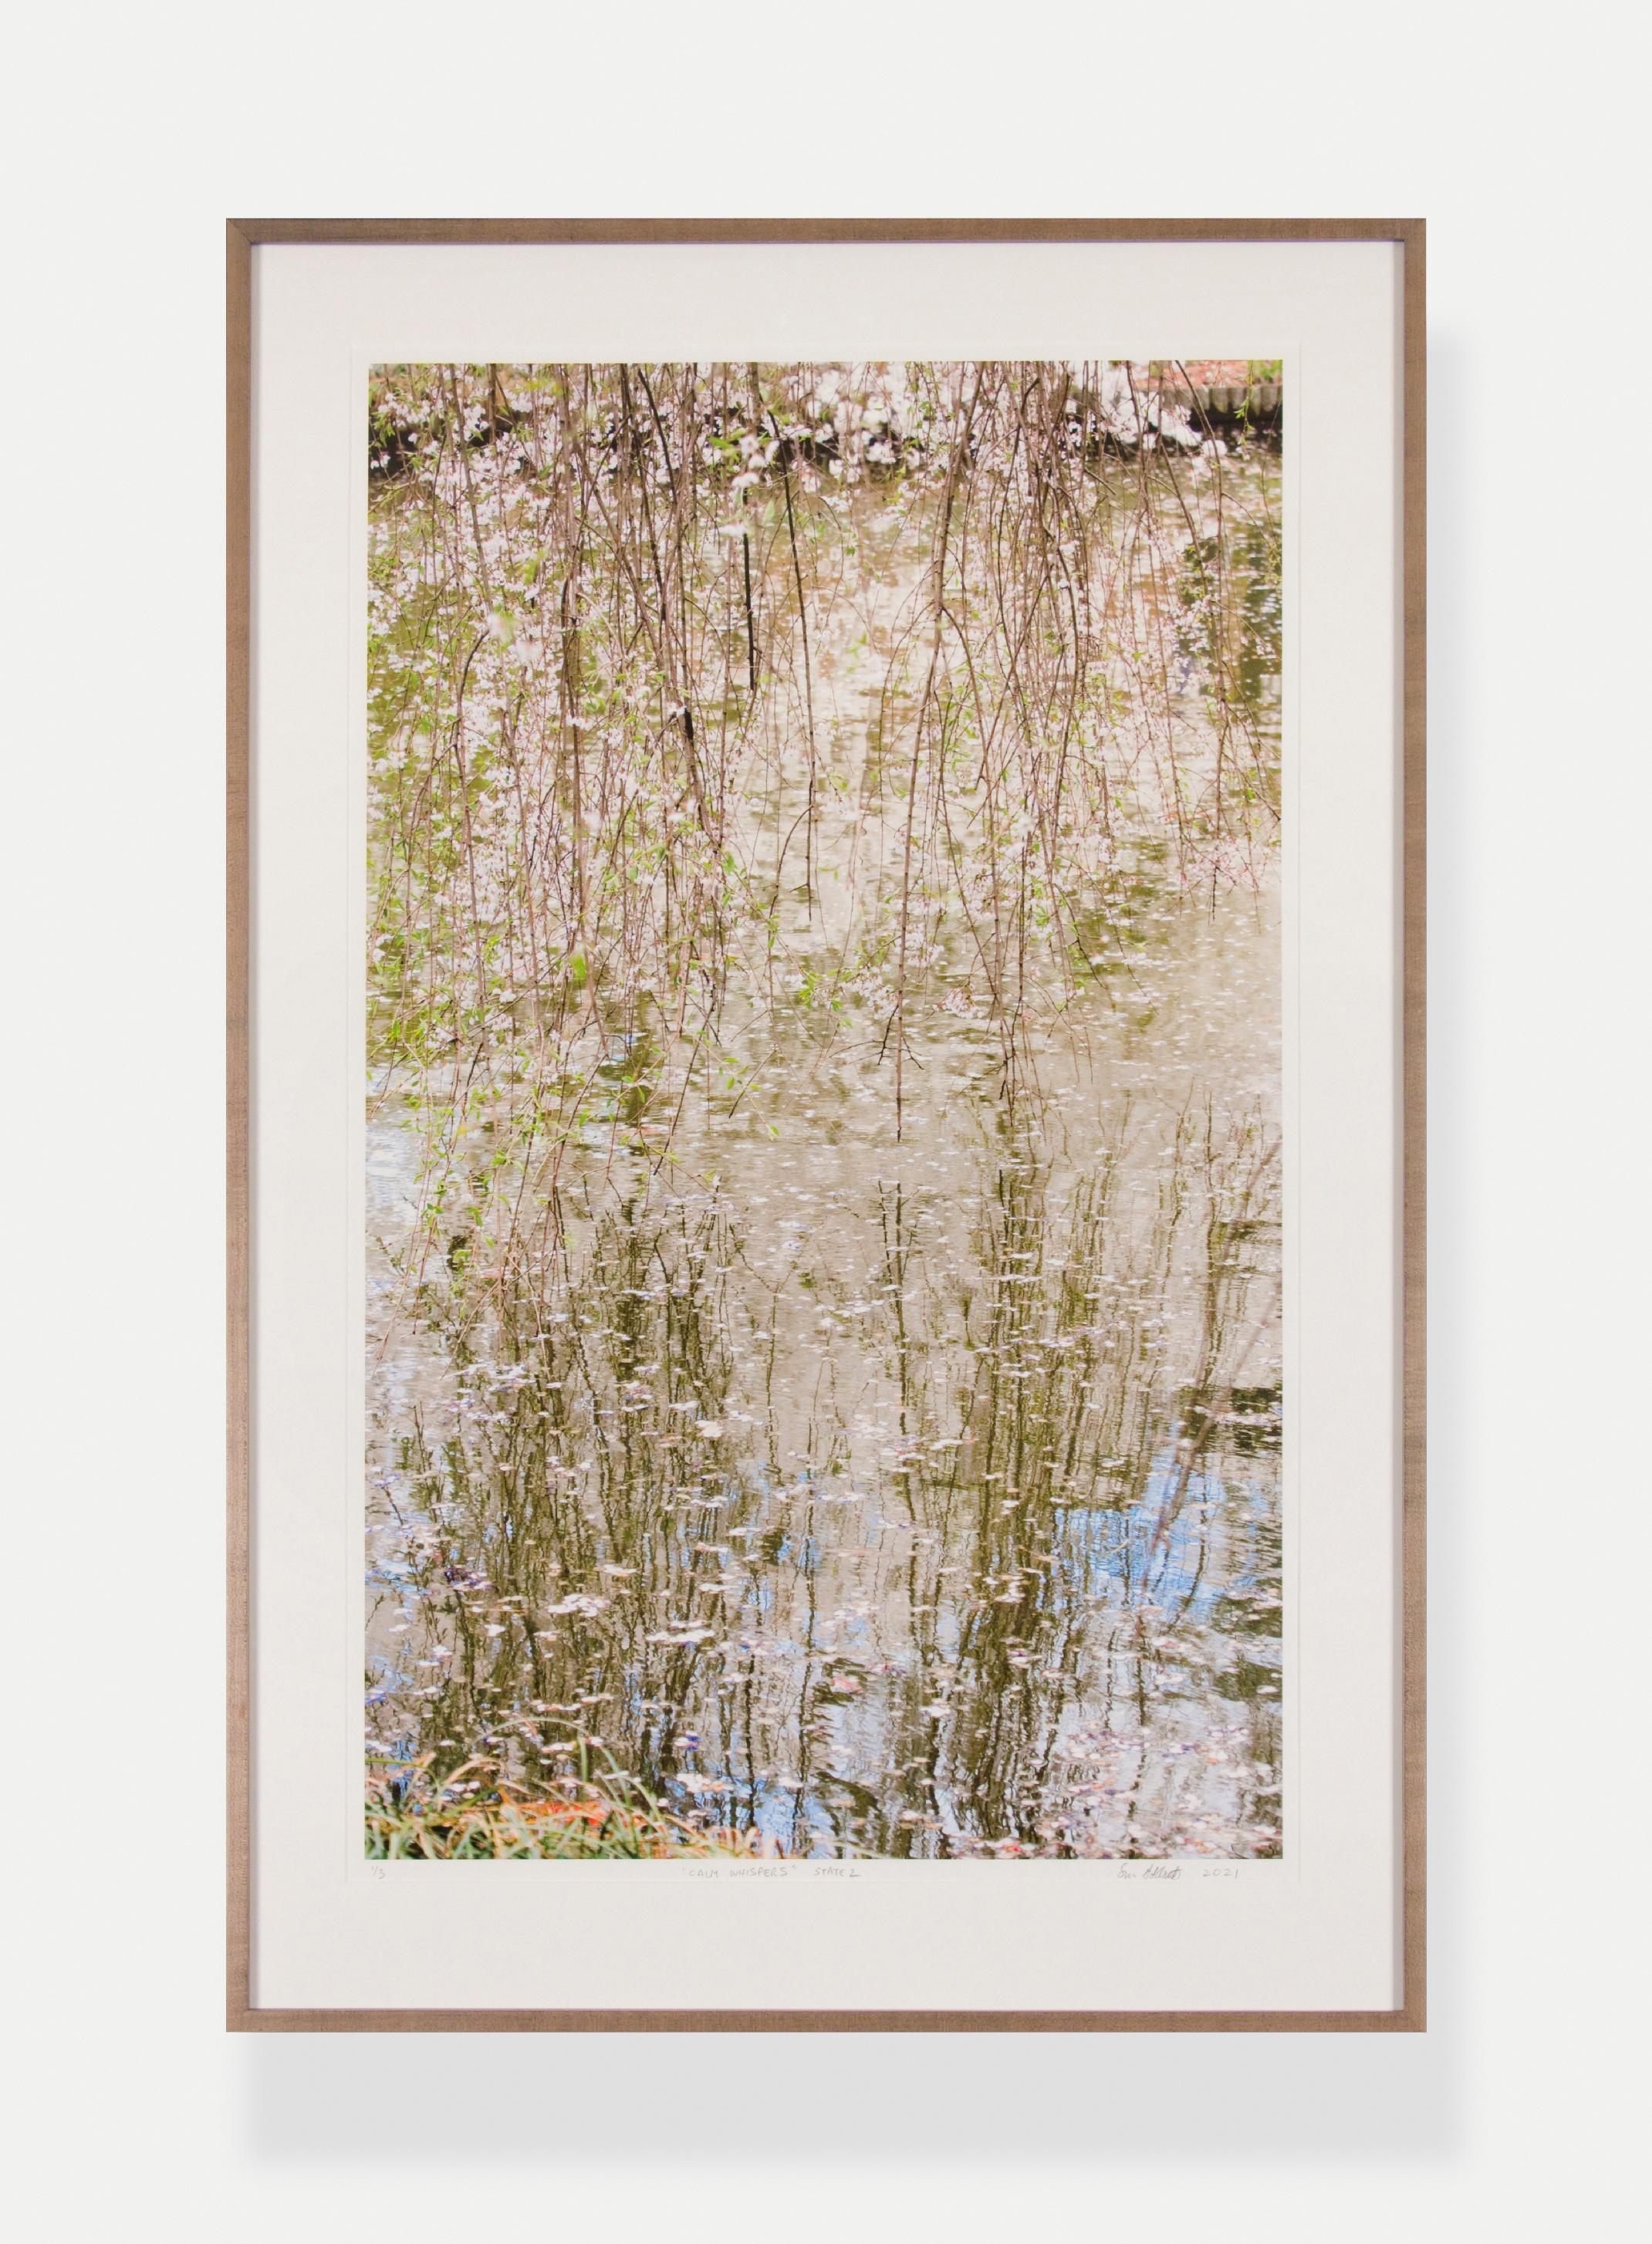 Susan Goldsmith Landscape Photograph - CALM WHISPERS - STATE 2 -  Waterscape / Reflections / Contemporary Art